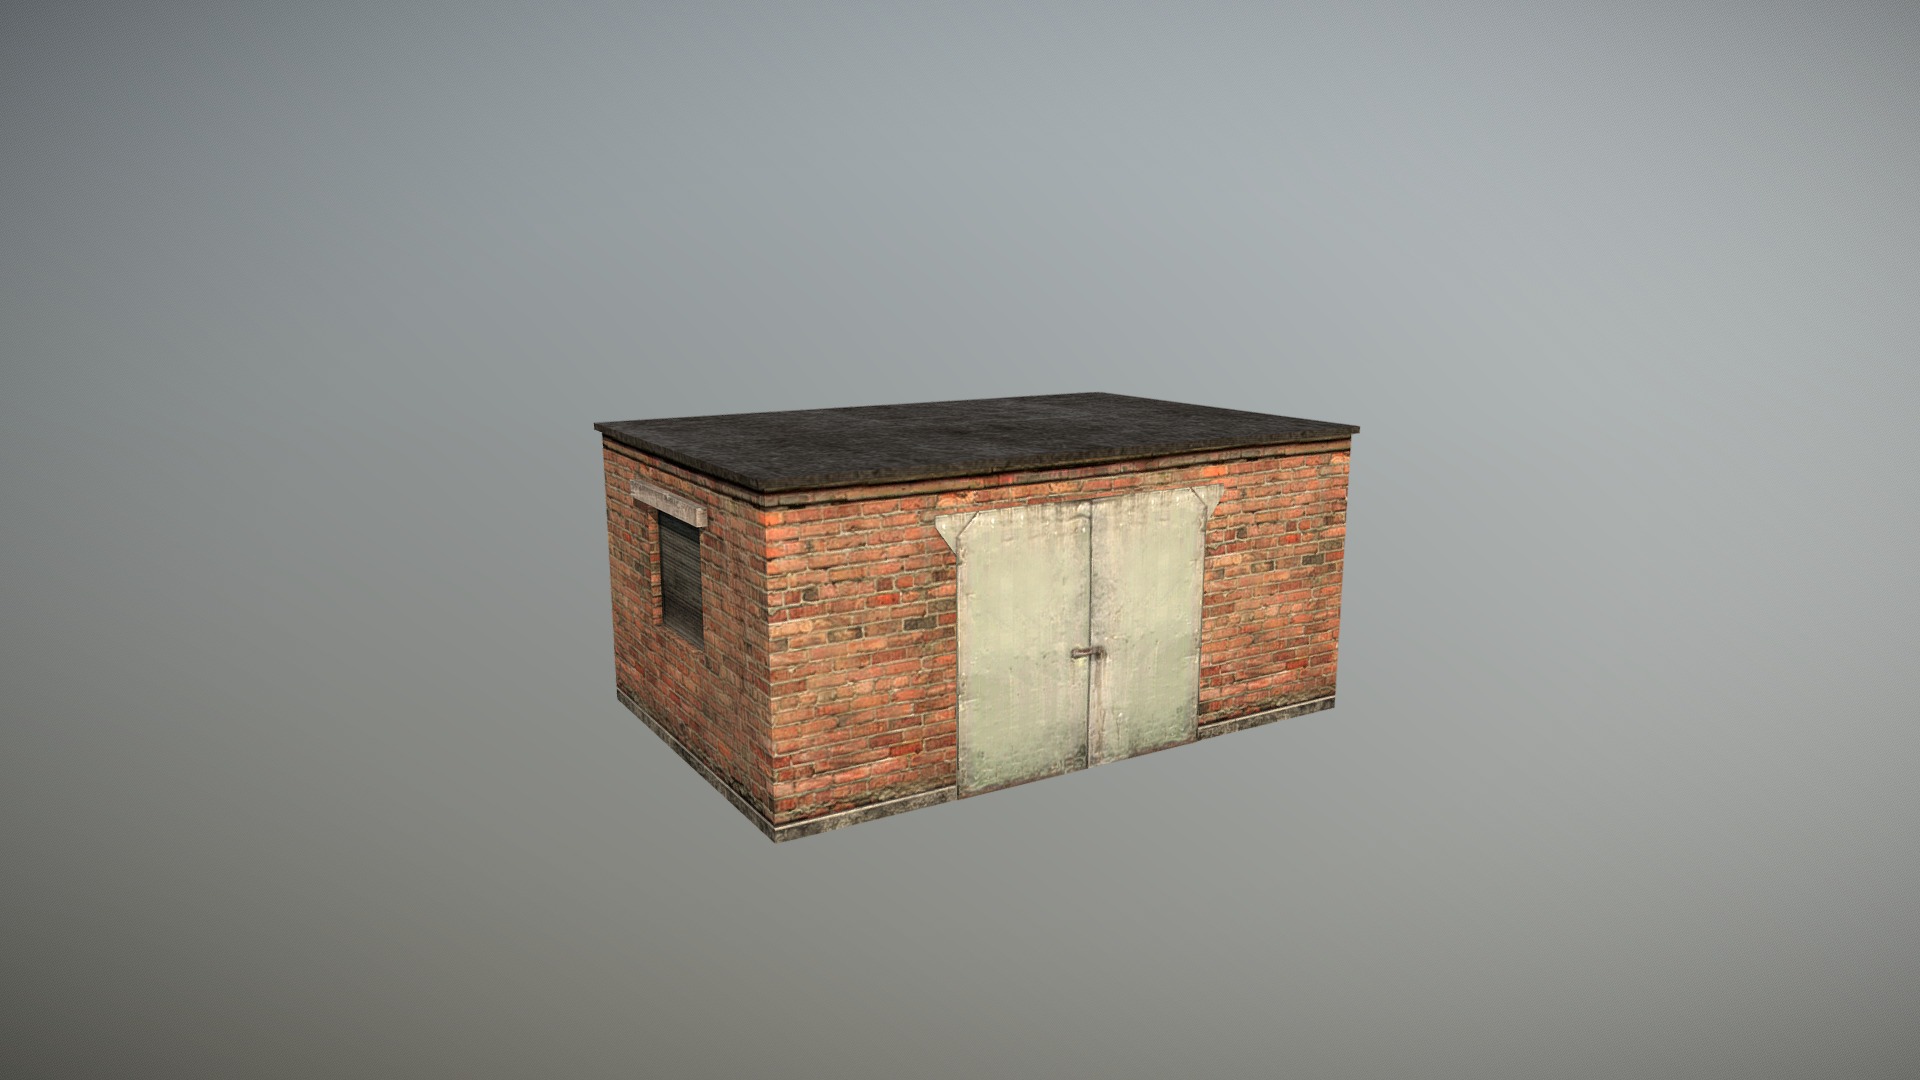 3D model Railway Shed RW_Shed_05 - This is a 3D model of the Railway Shed RW_Shed_05. The 3D model is about a small brick building.